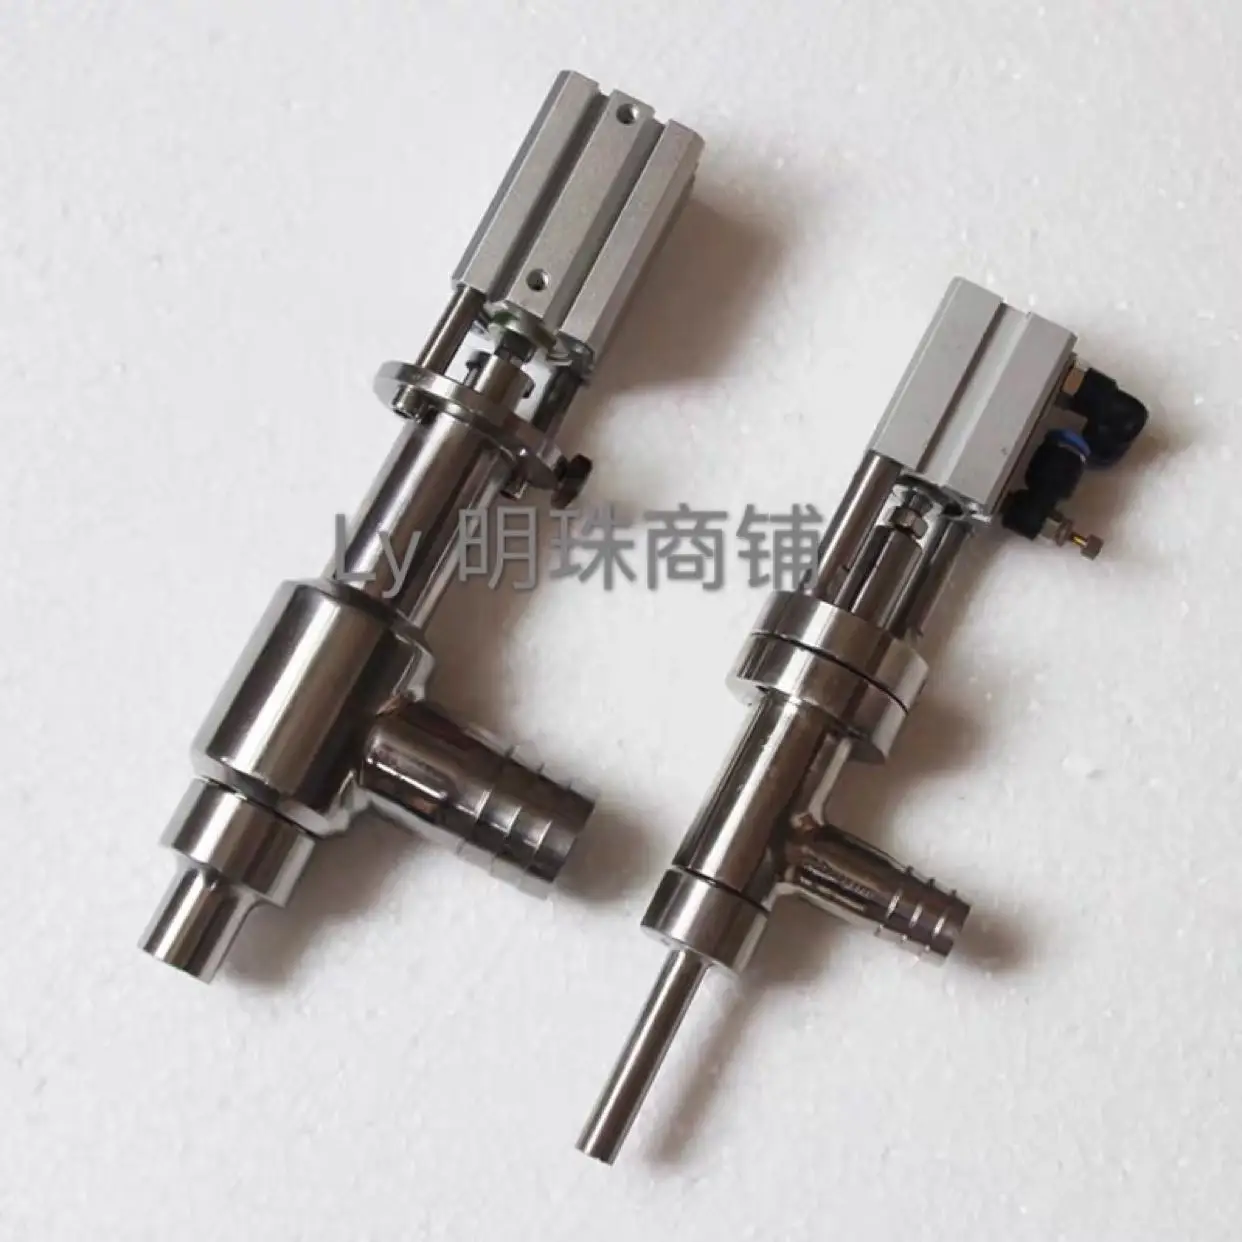 304 stainless steel liquid filling machine Fittings Drip-proof filling head Drip-proof discharge valve discharge nozzle